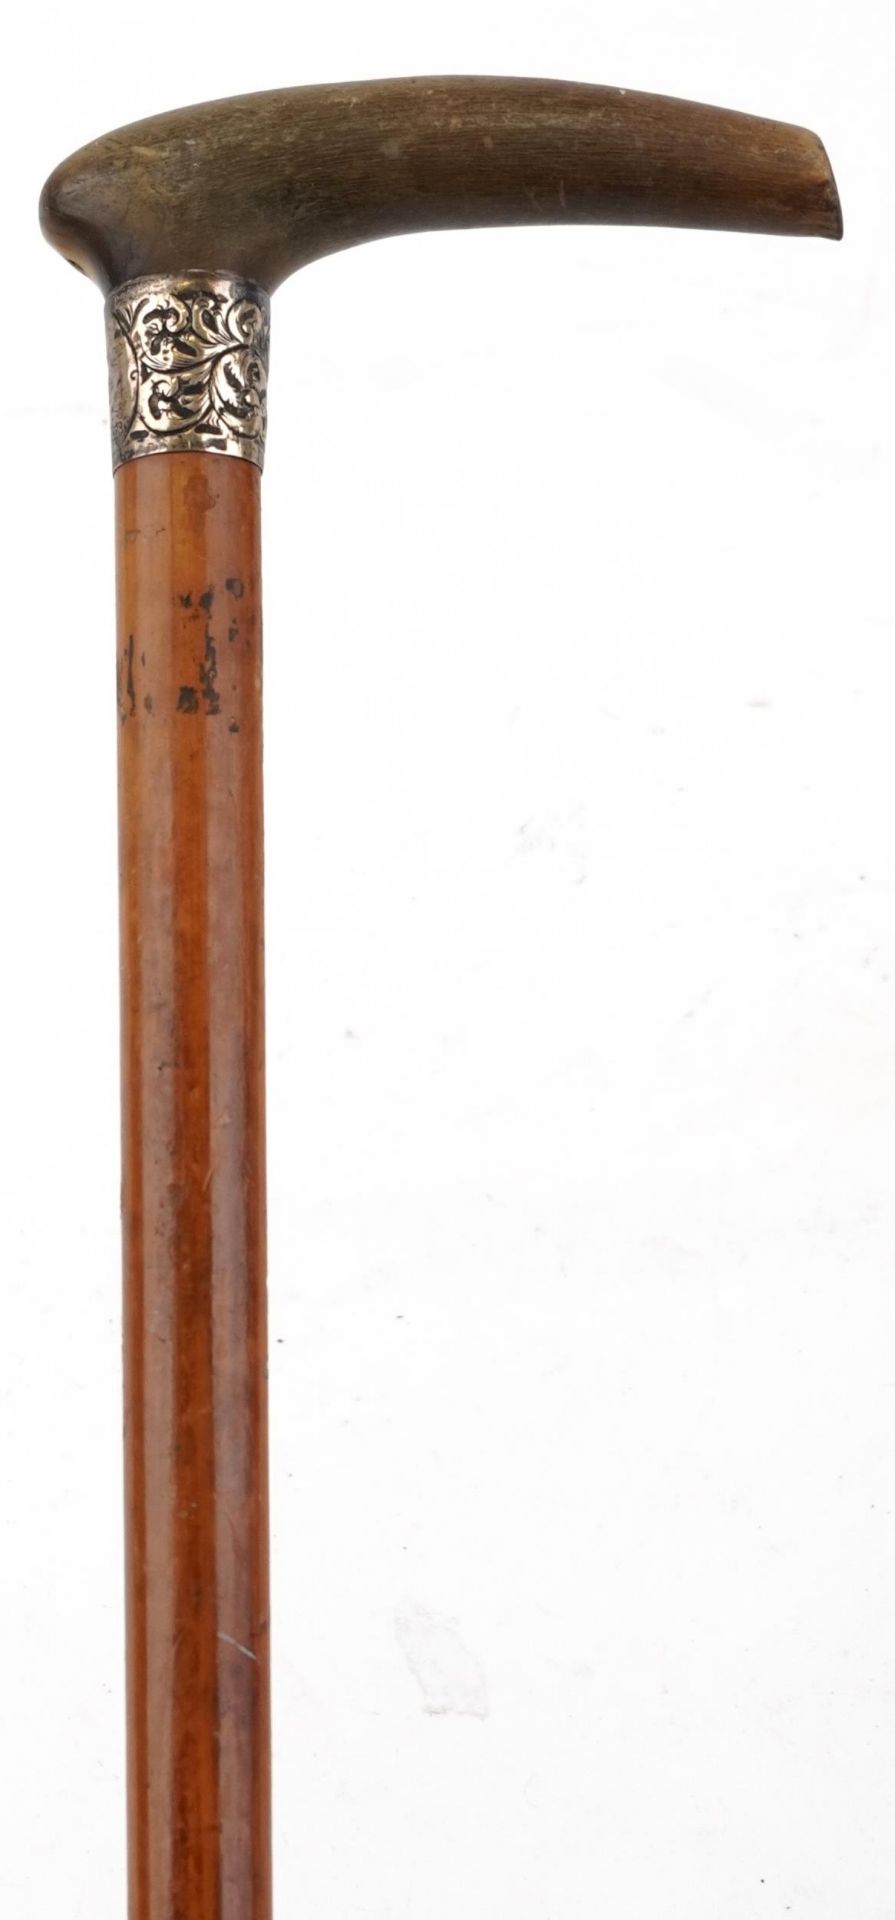 Malacca walking stick with horn handle and engraved silver collar, the handle possibly rhinoceros